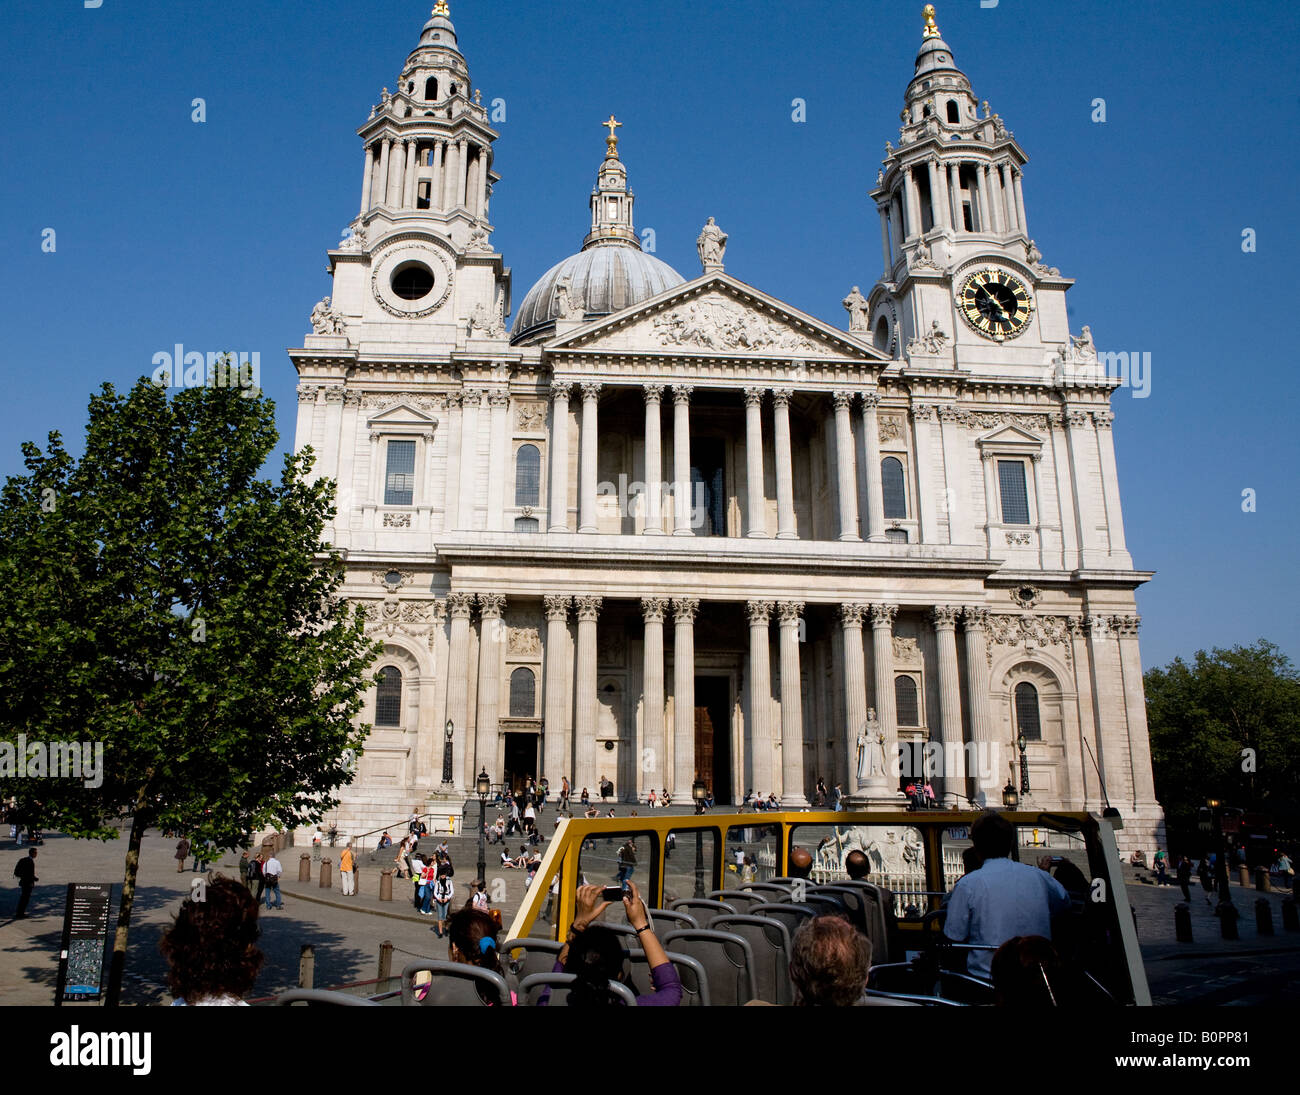 St Pauls Cathedral From An Open Top Tourist Bus London UK Europe Stock Photo